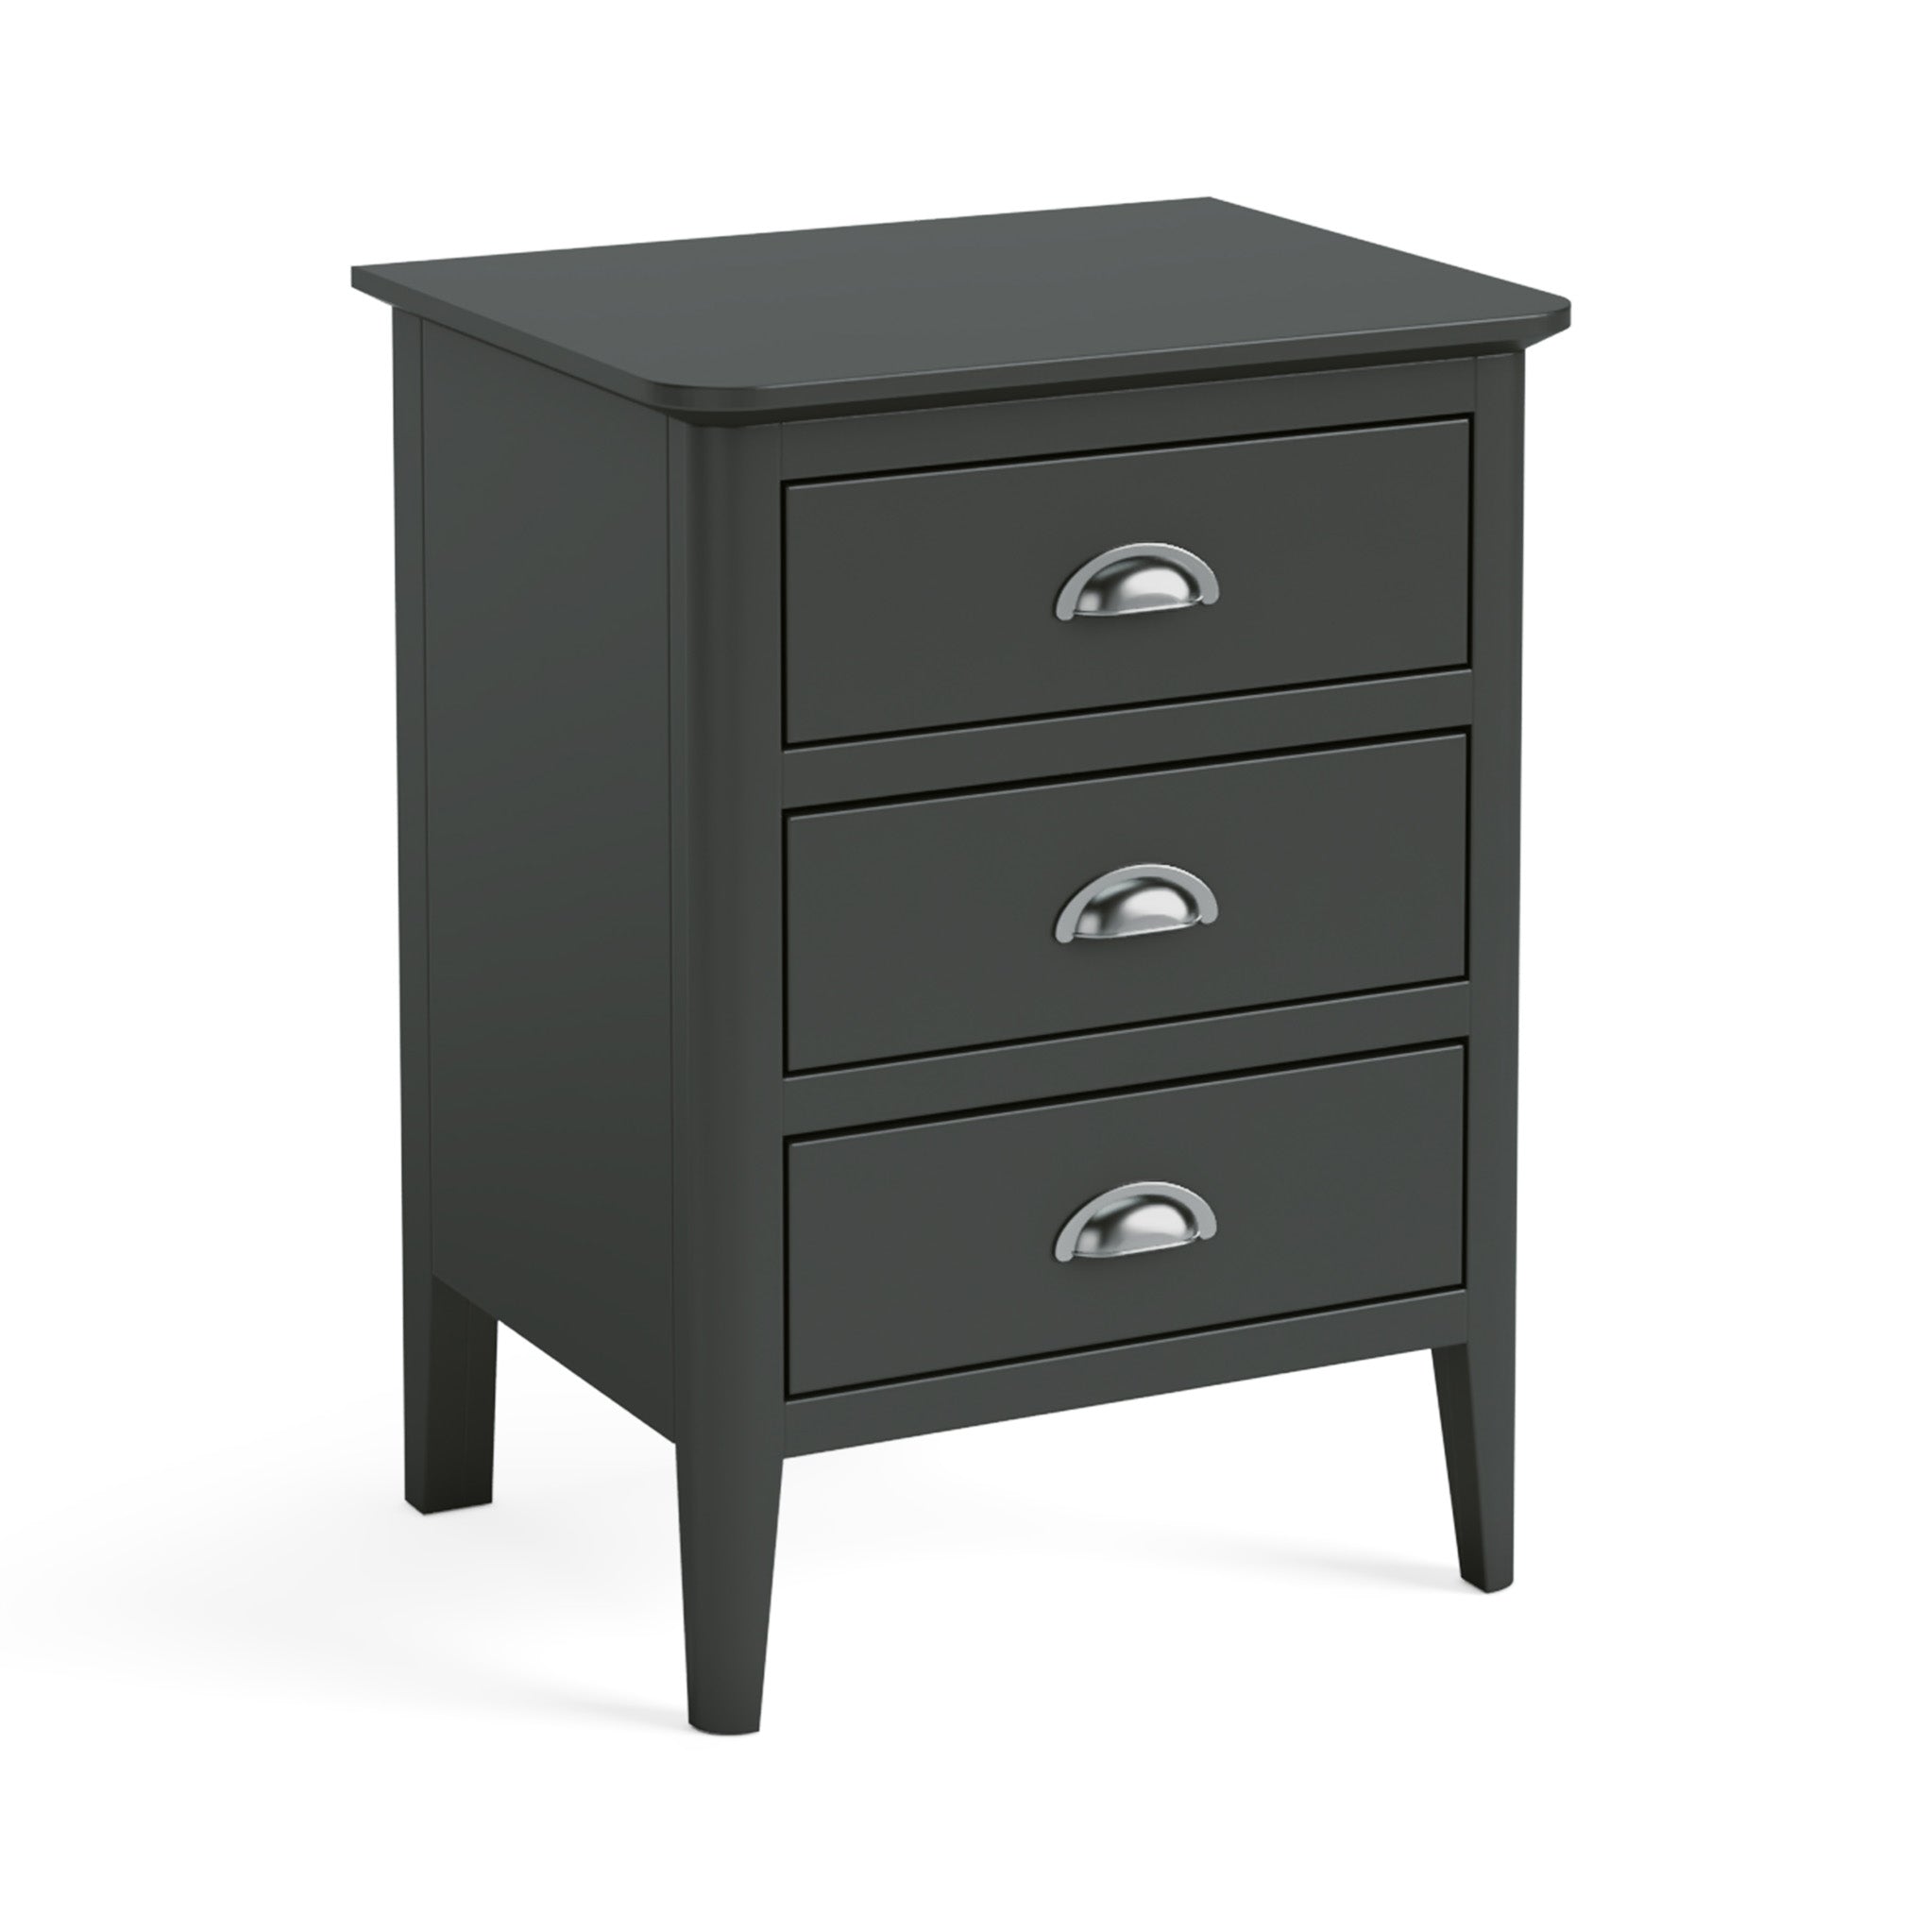 Dumbarton Charcoal Grey Scandi Bedside Table 3 Storage Drawer Cabinet Contemporary Painted Solid Pine Wooden Nightstand For Bedroom